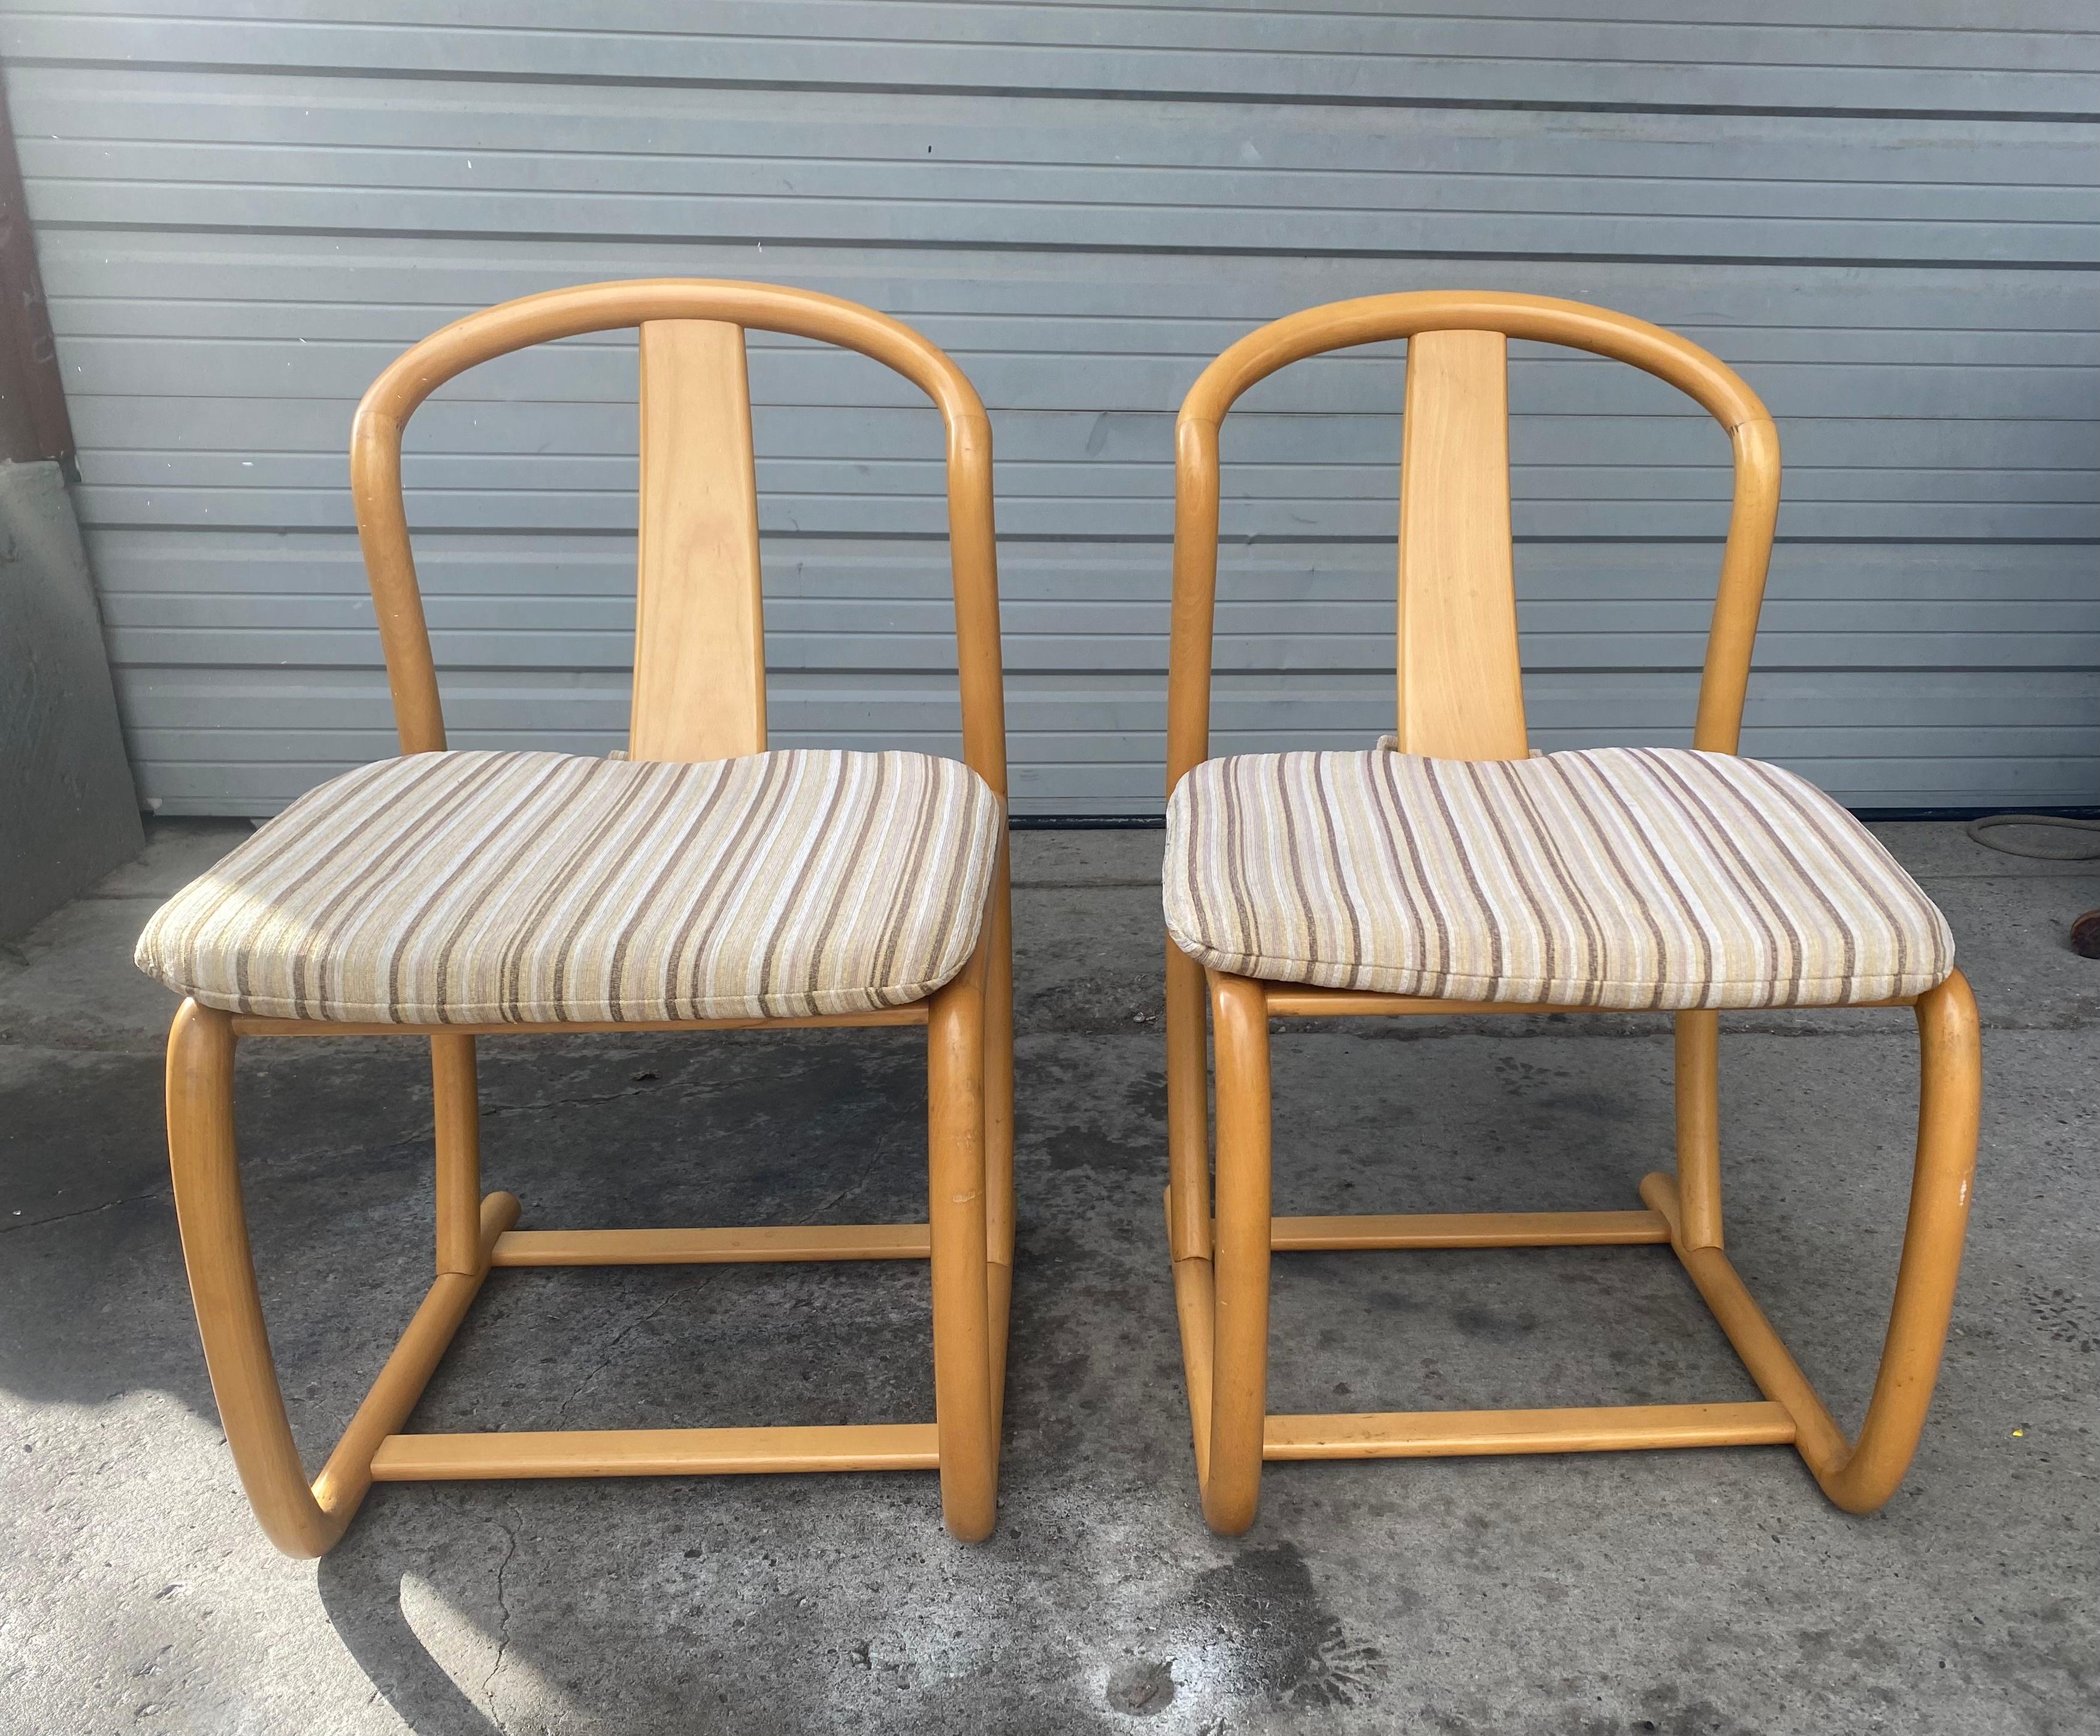 Fabric Set of Four Modern Dining Chairs in beech wood by Tecnosedia , Italy, 1980s For Sale